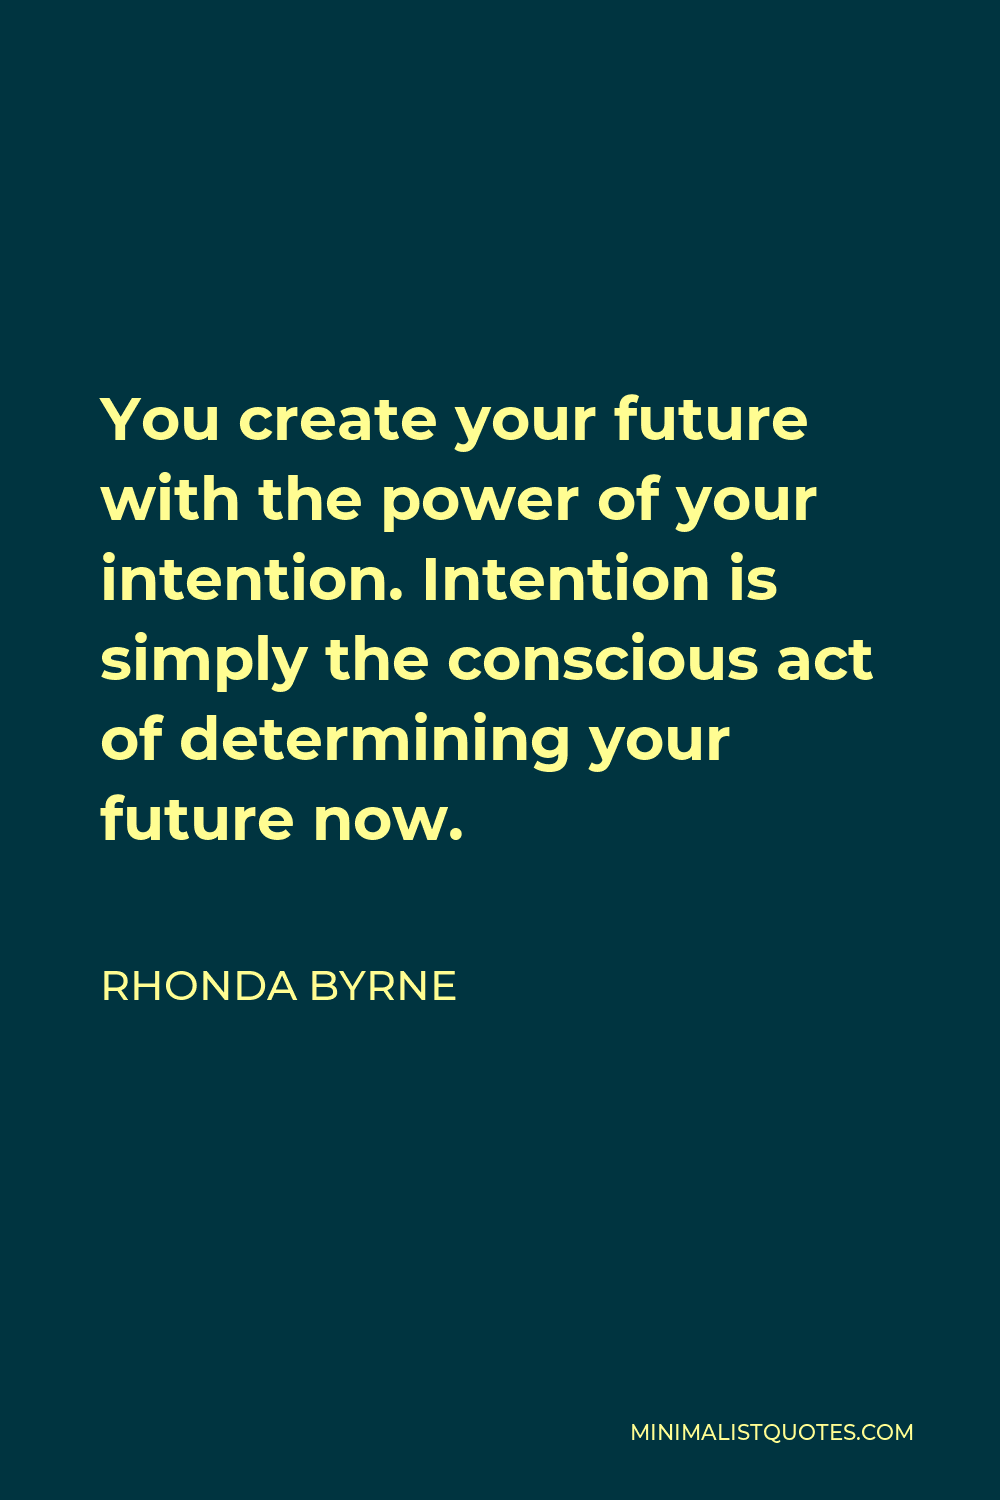 Rhonda Byrne Quote - You create your future with the power of your intention. Intention is simply the conscious act of determining your future now.